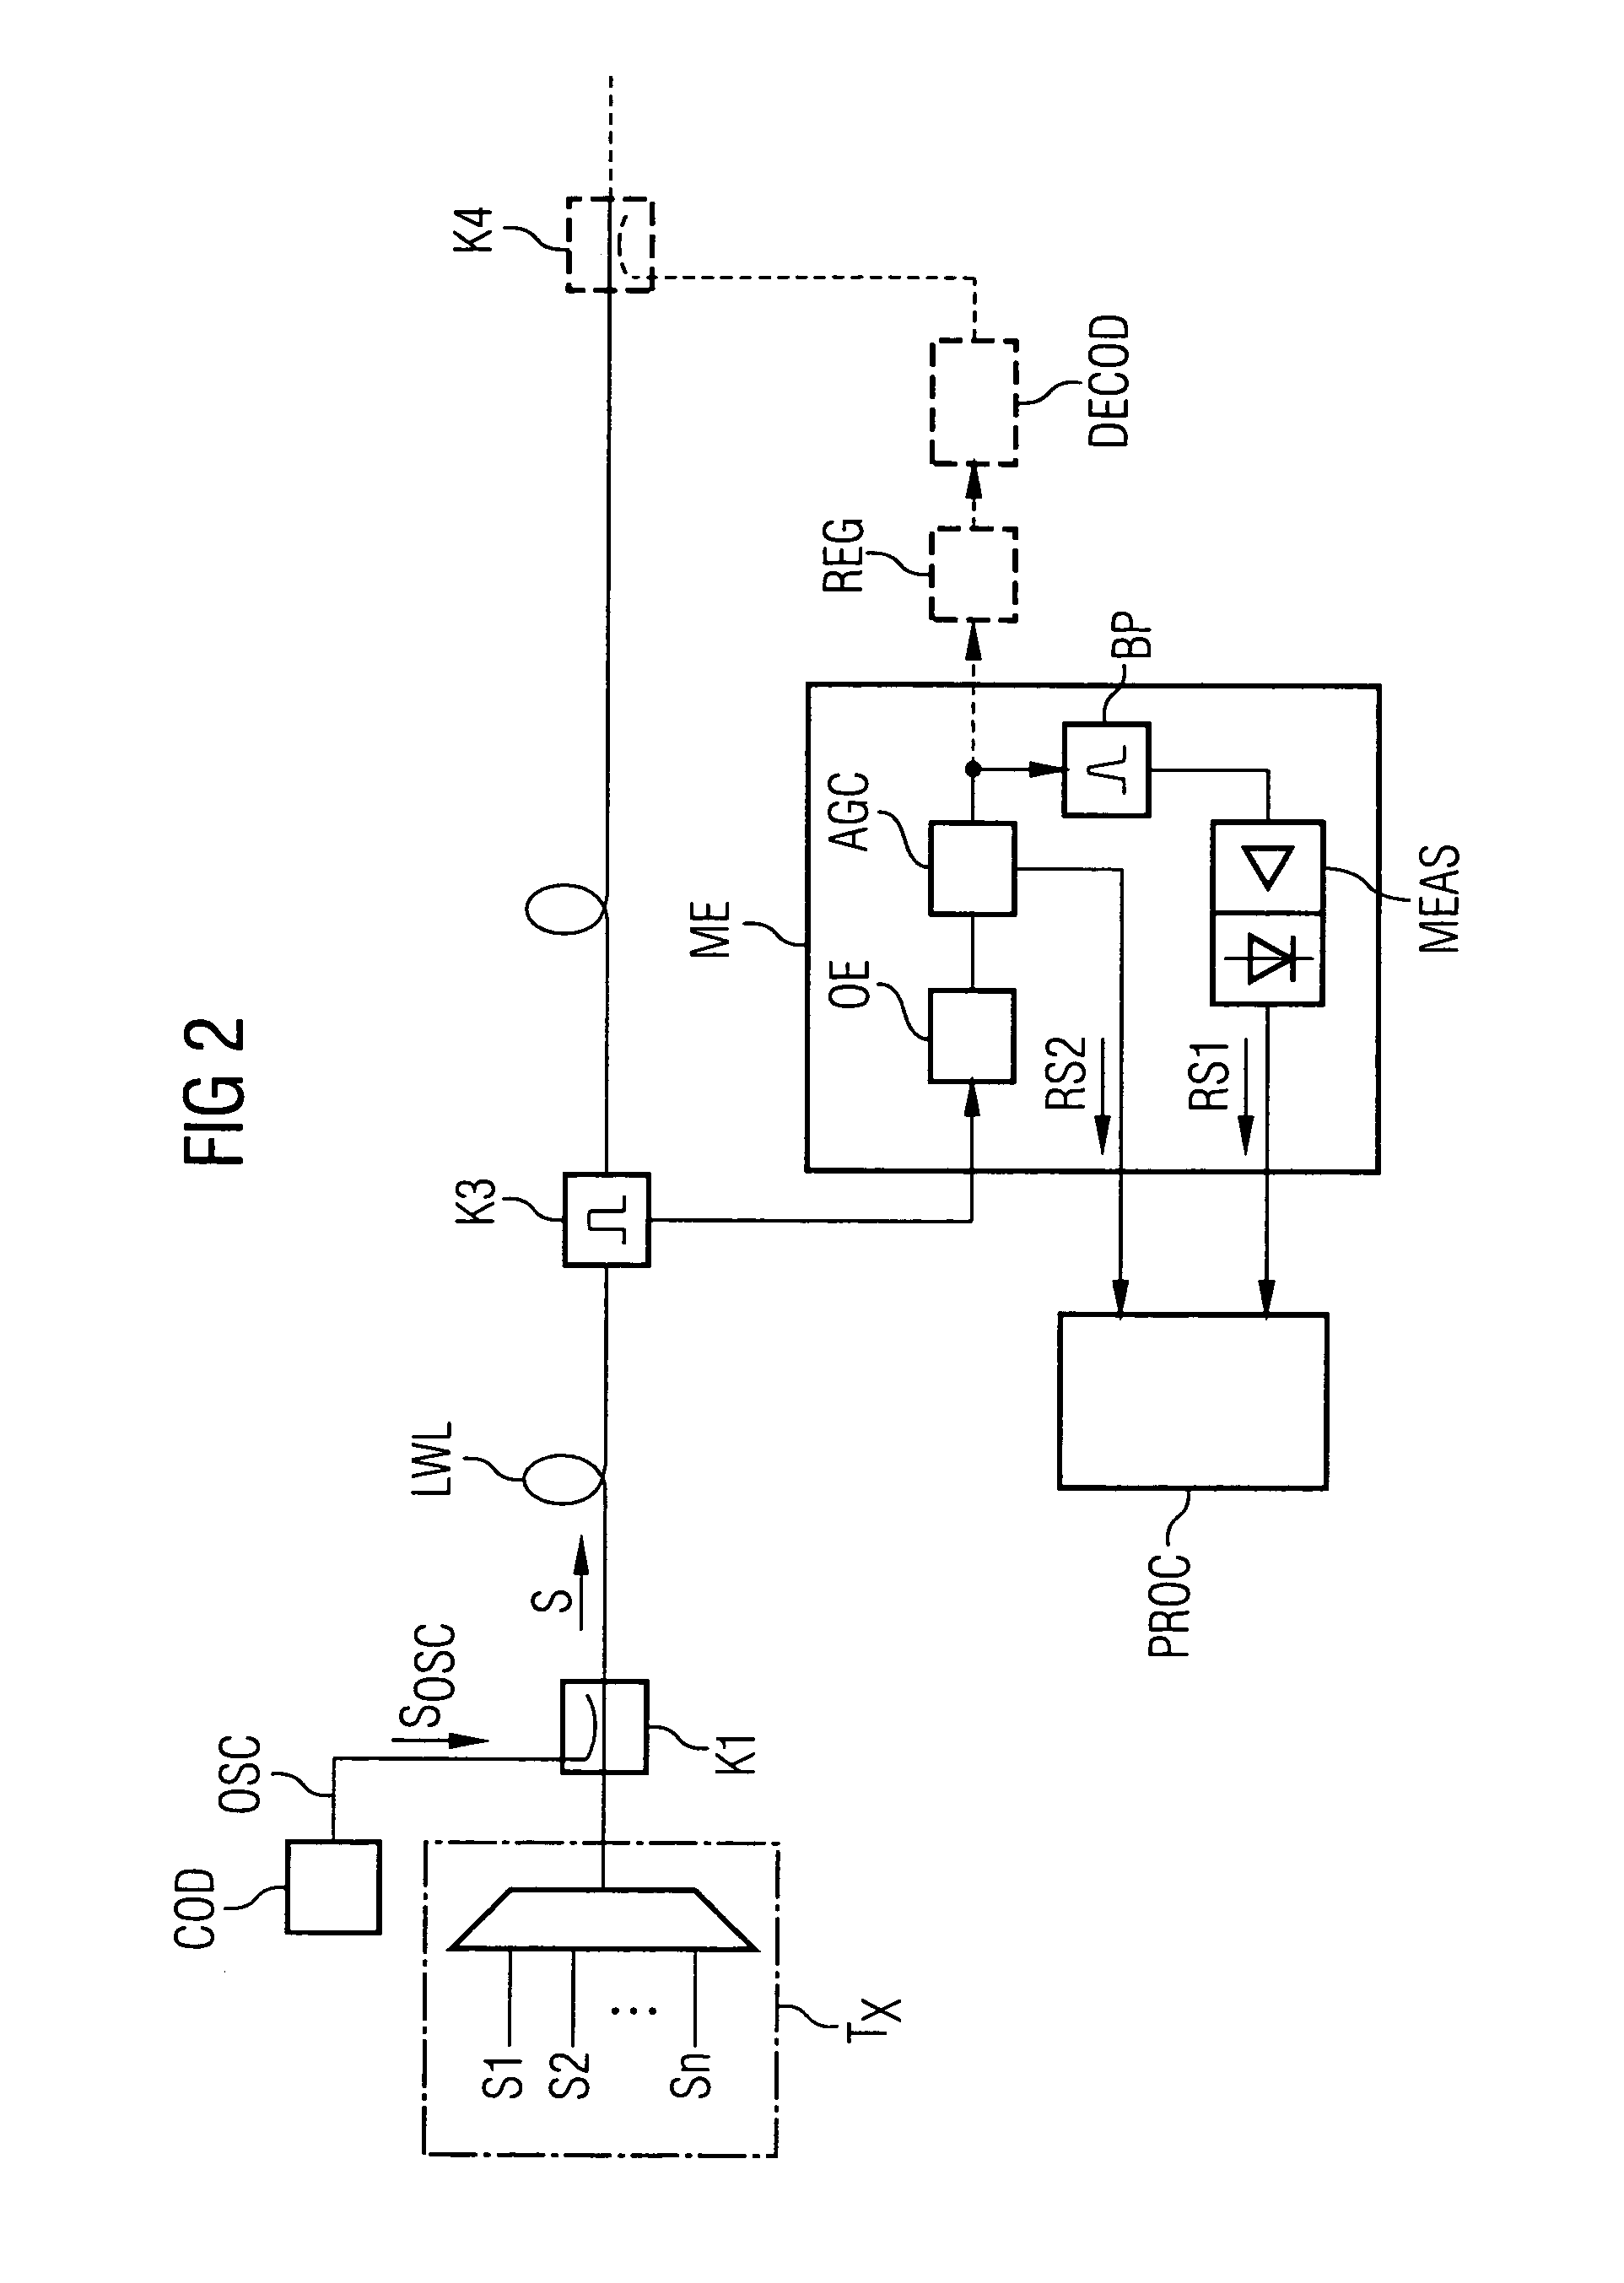 Method for detecting a check-back signal in an optical transmission system